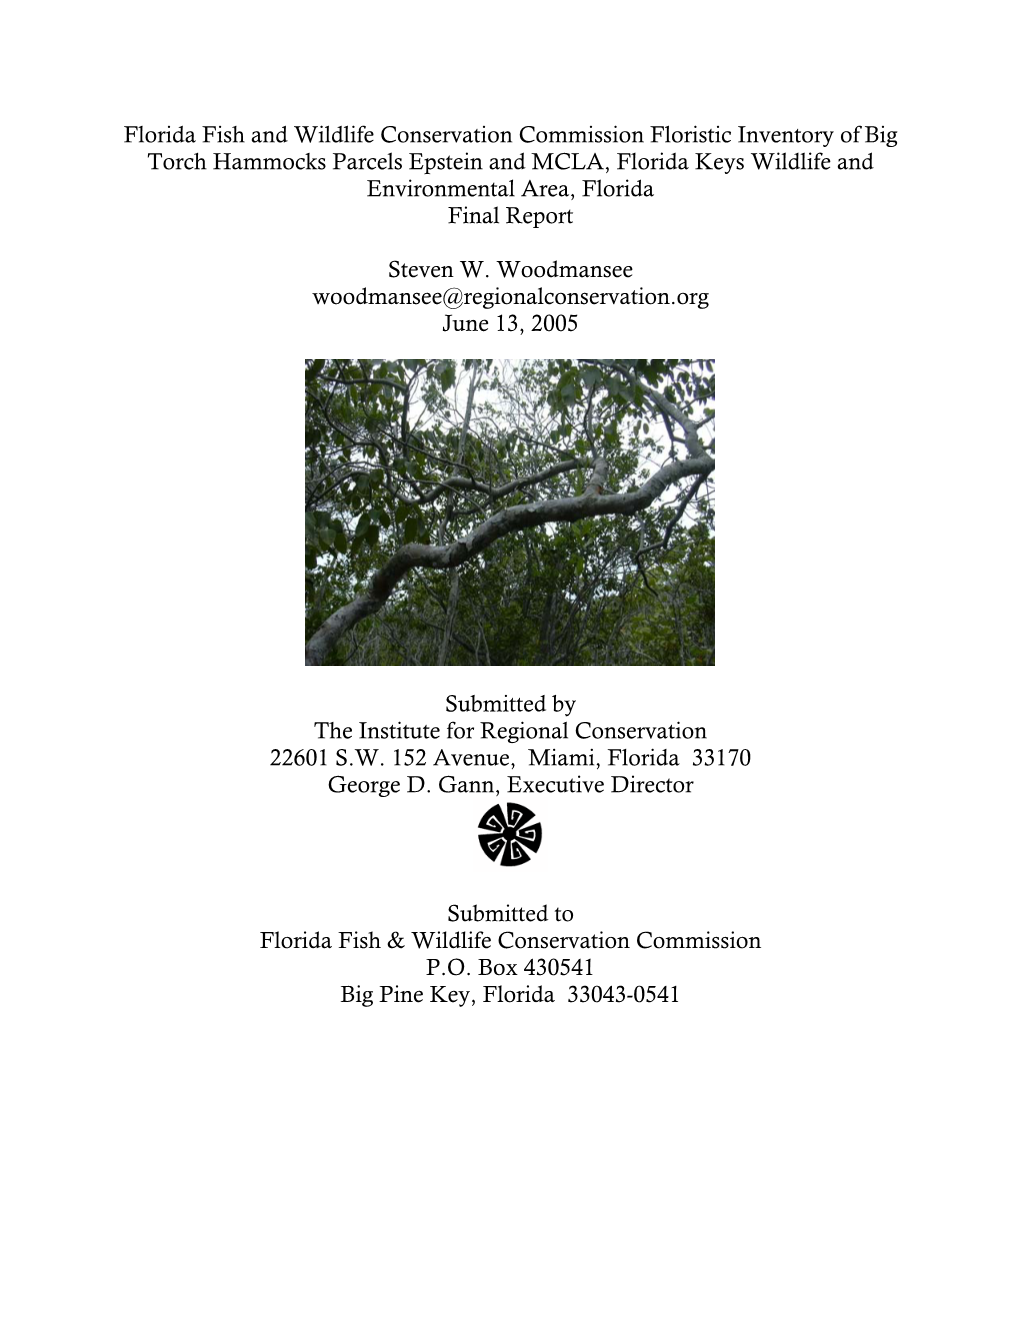 Florida Fish and Wildlife Conservation Commission Floristic Inventory Of